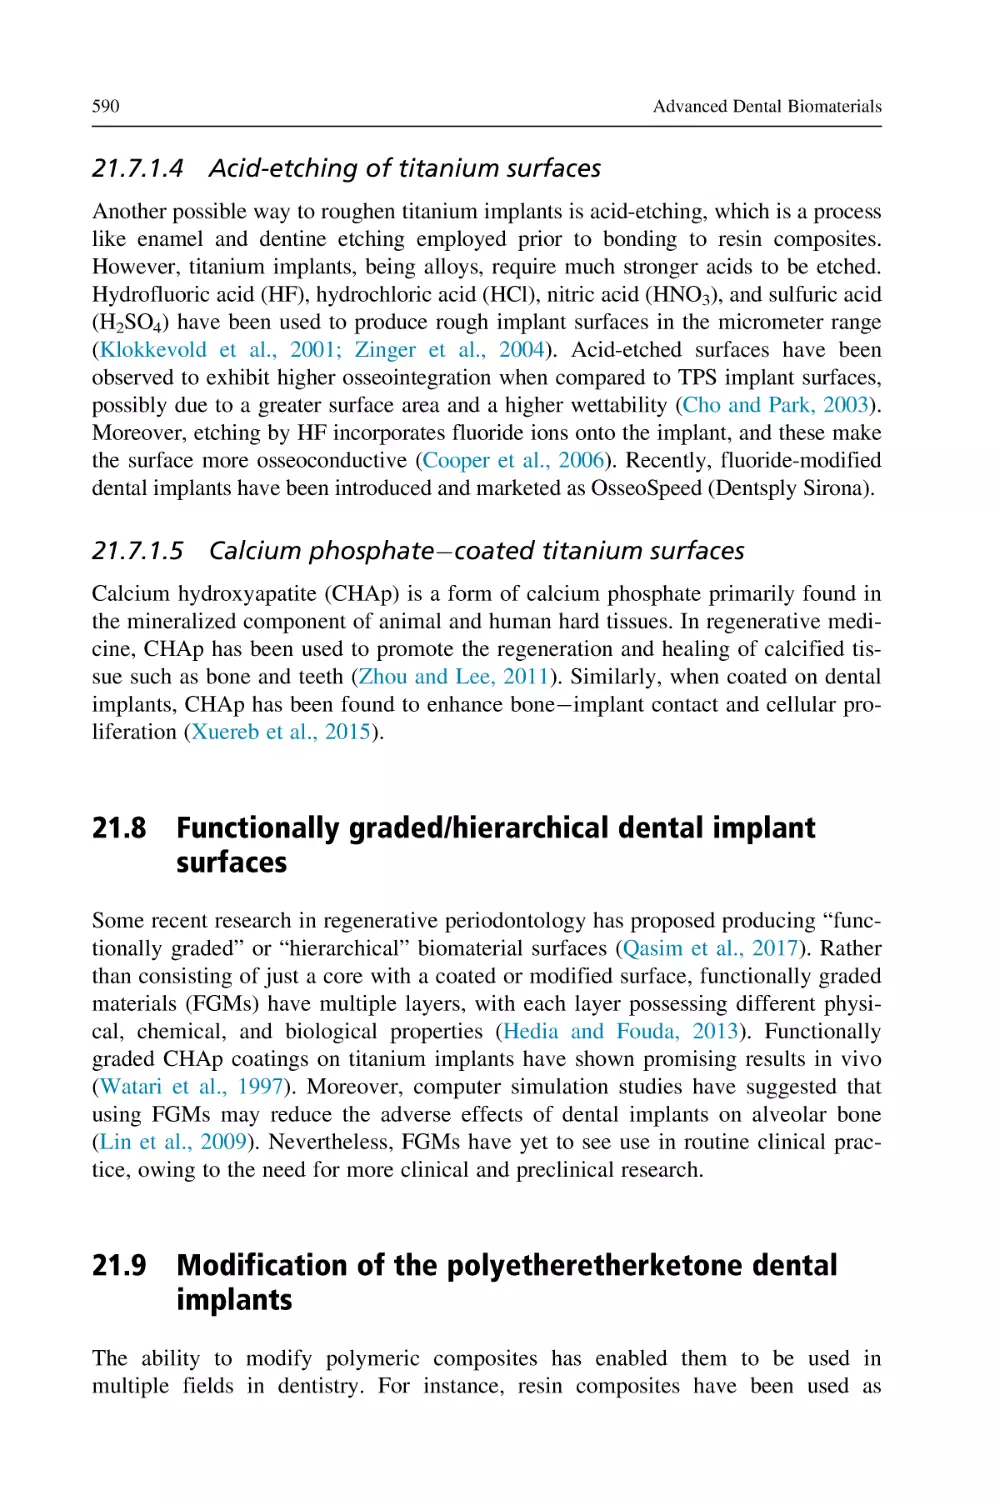 21.7.1.4 Acid-etching of titanium surfaces
21.7.1.5 Calcium phosphate–coated titanium surfaces
21.8 Functionally graded/hierarchical dental implant surfaces
21.9 Modification of the polyetheretherketone dental implants